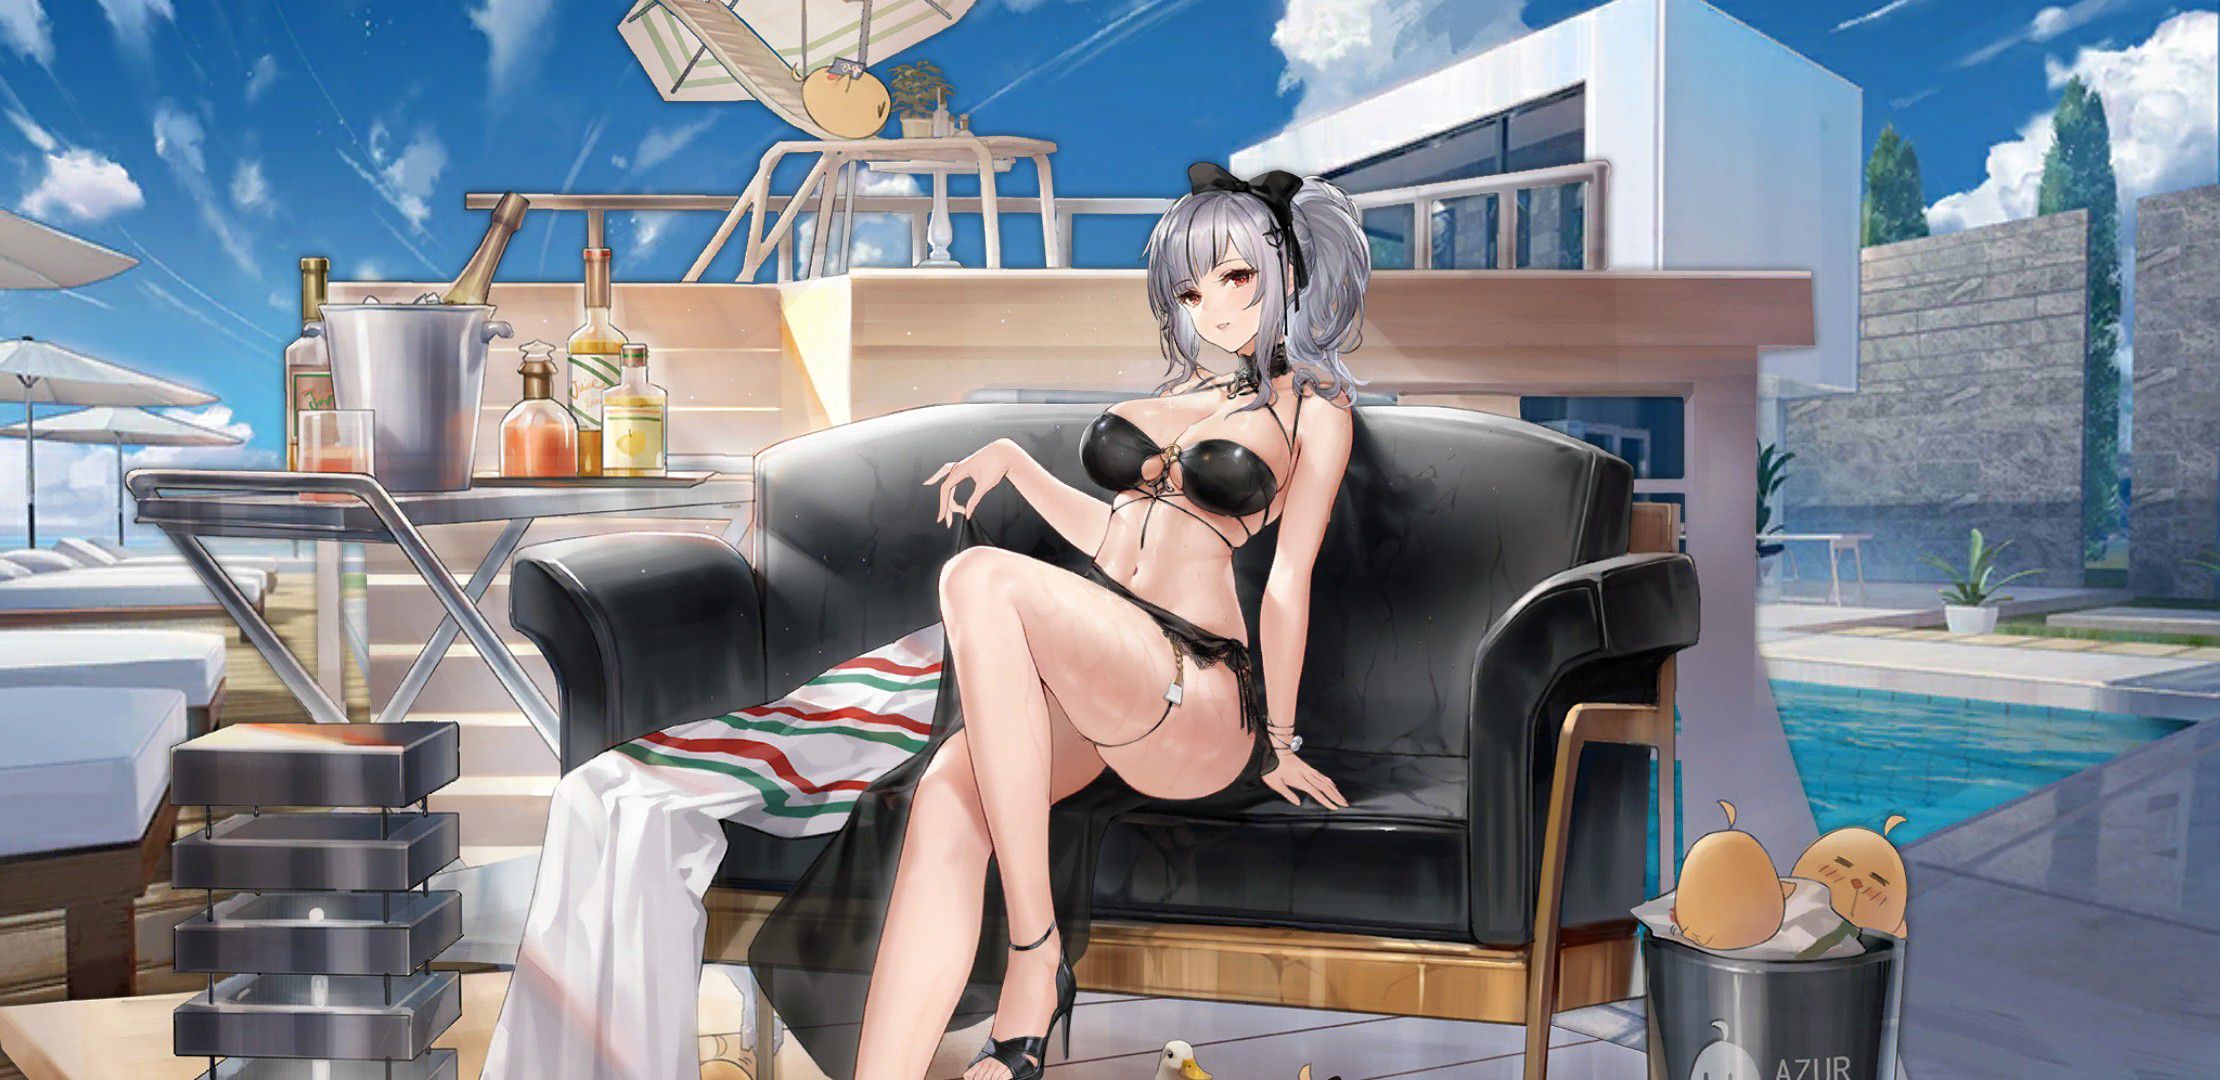 【There is an image】 Smartphone that urges charging with erotic swimsuits is malicious 33